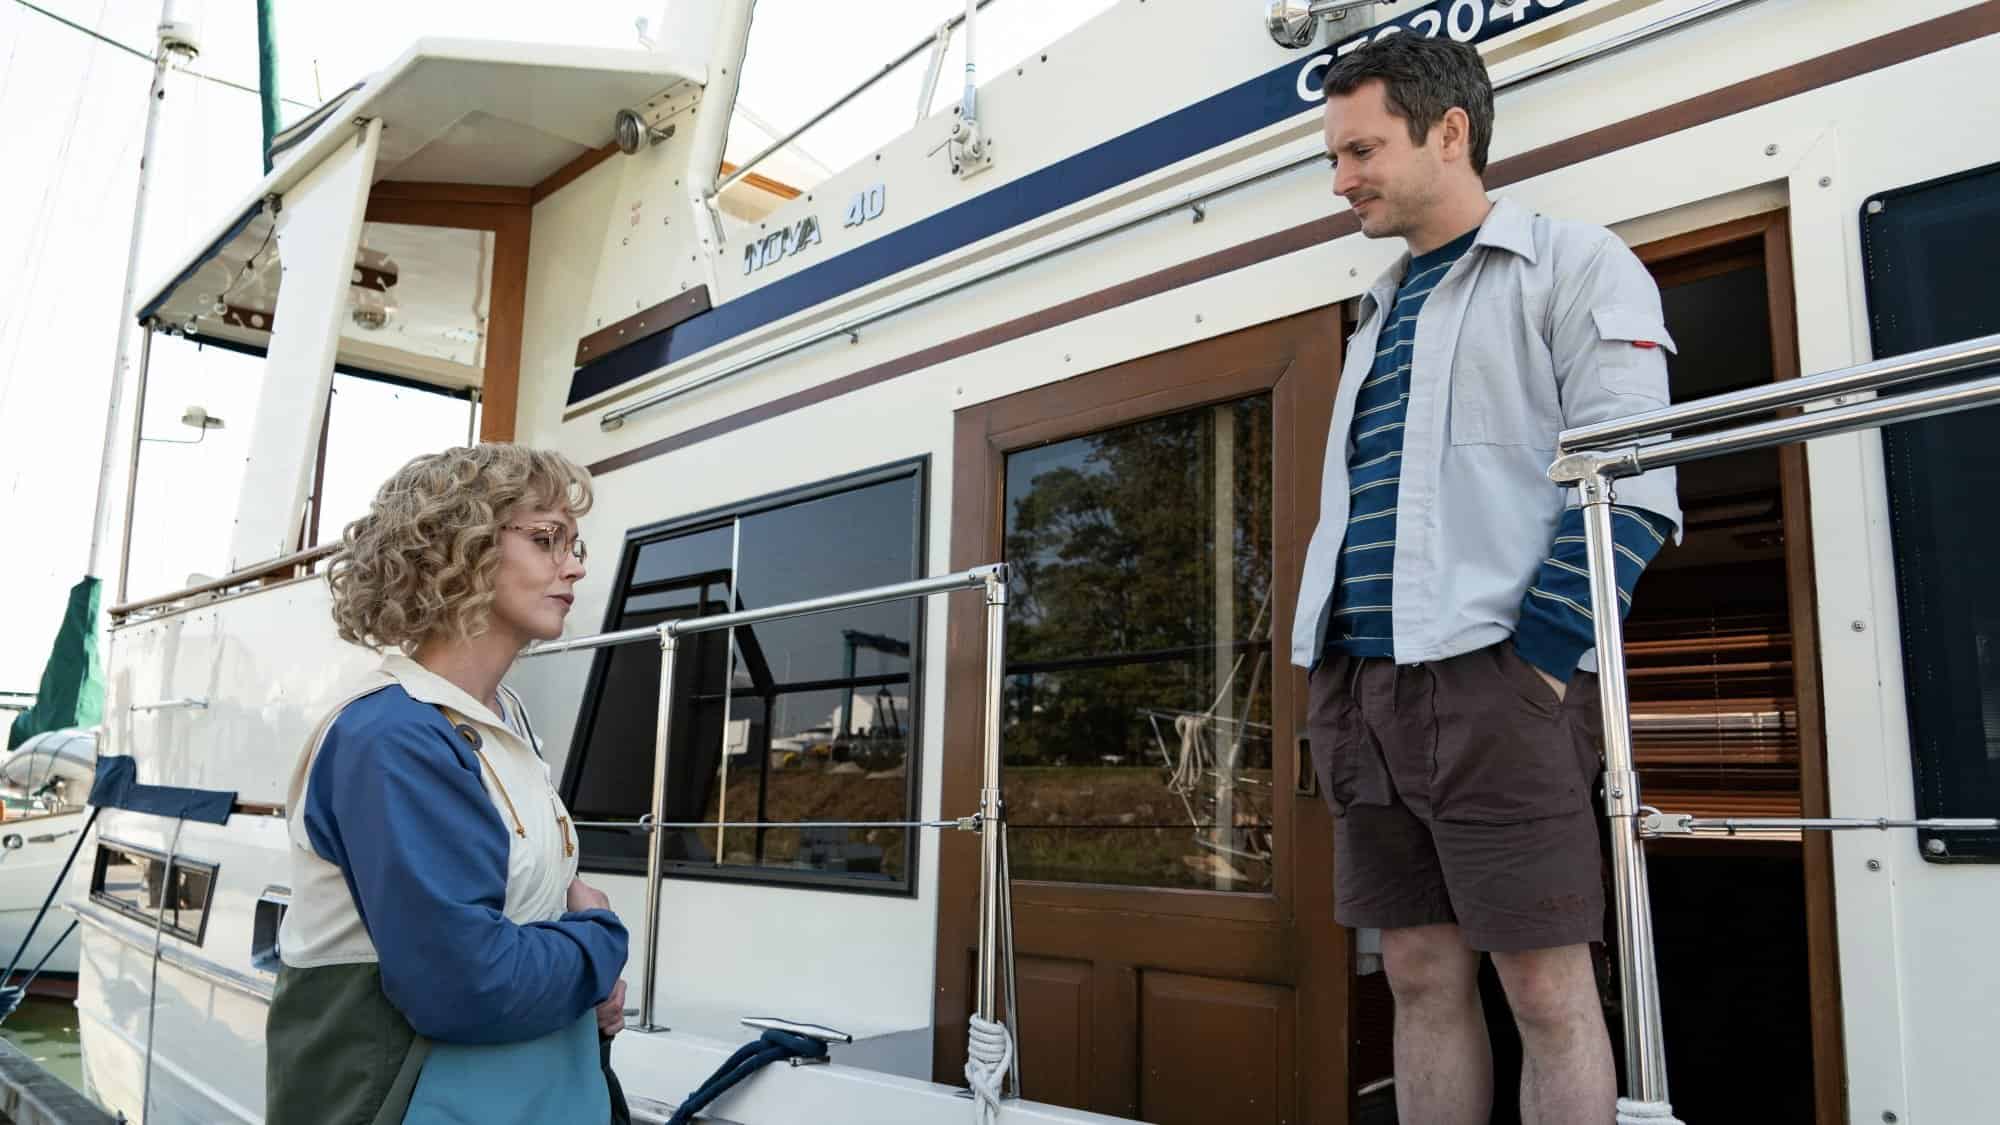 A woman looks up at a man on a boat in this image from Showtime.